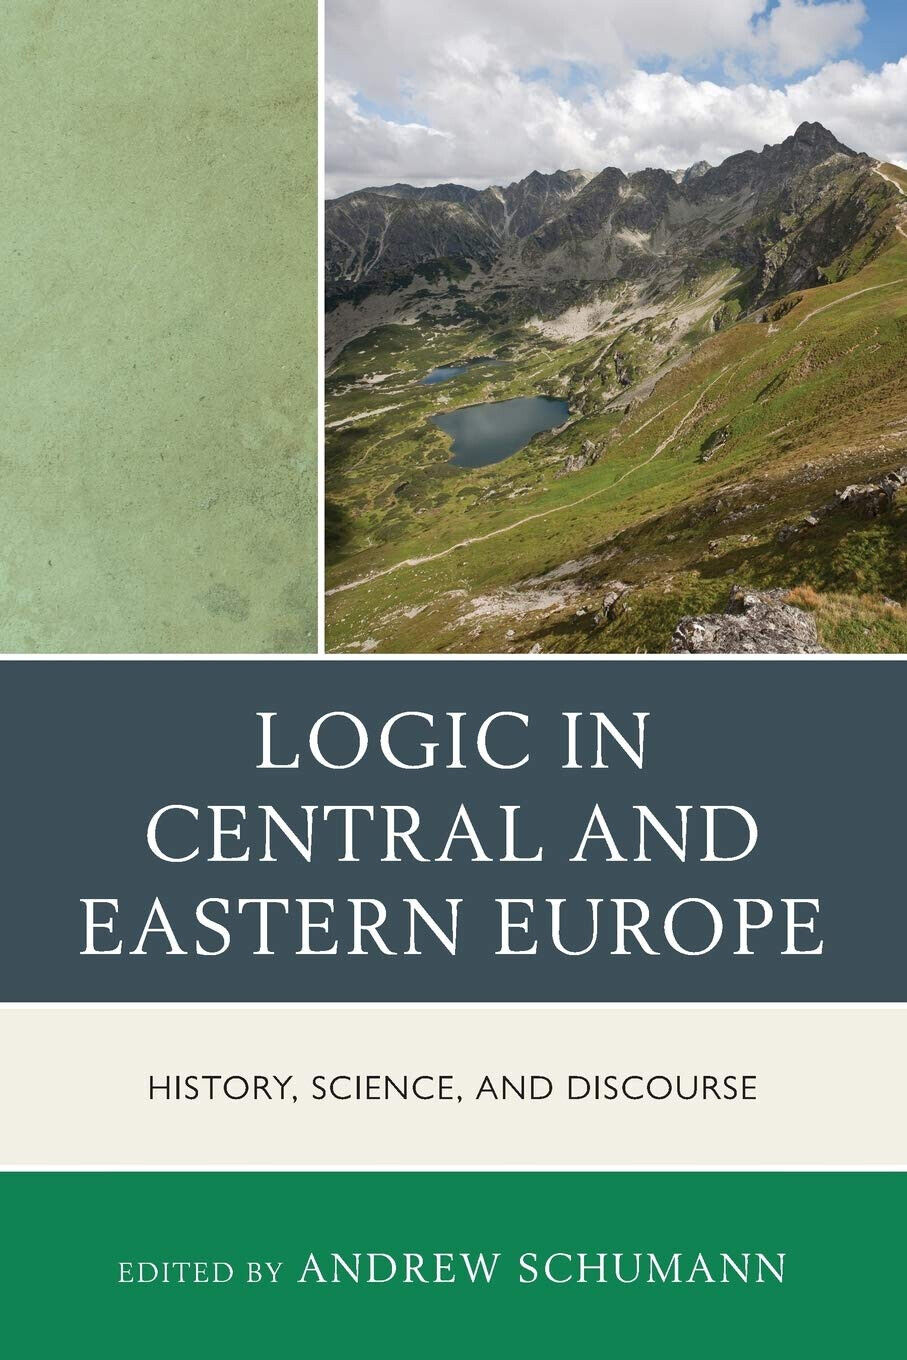 Logic in Central and Eastern Europe - Andrew Schumann - Rowman and Littlefield libro usato